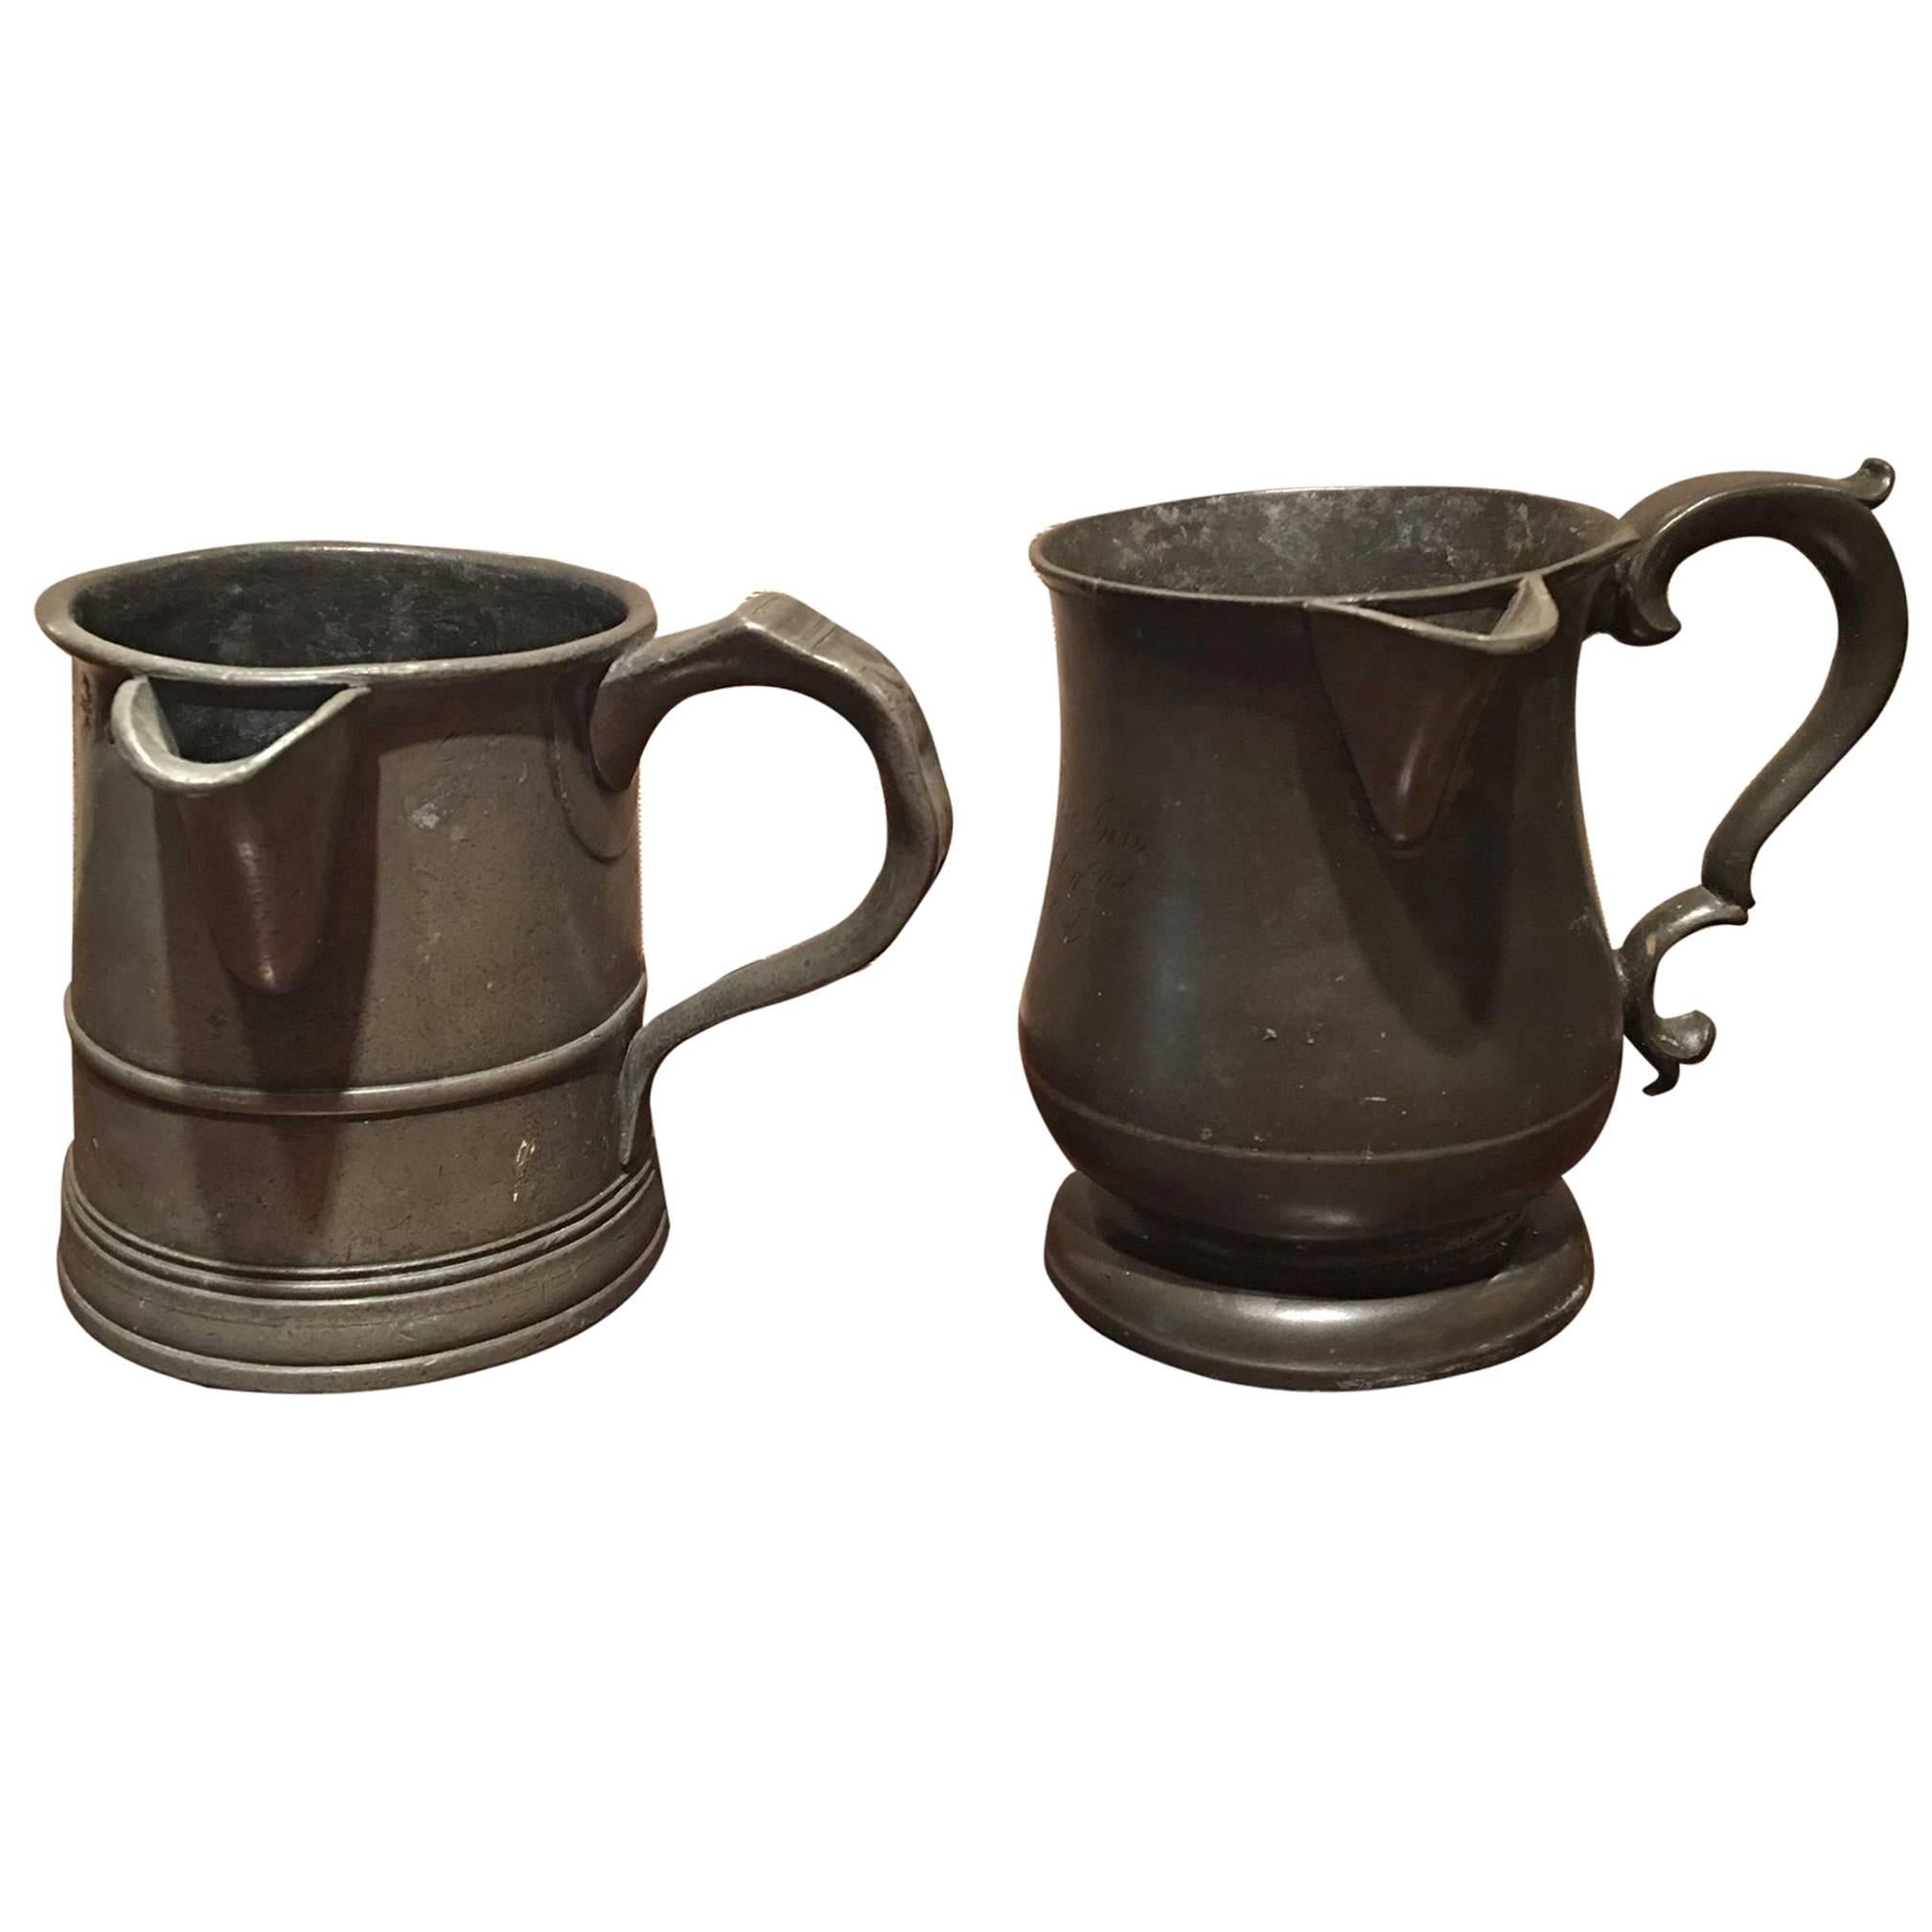 Pair of English Pewter Mugs or Cups, 18th Century